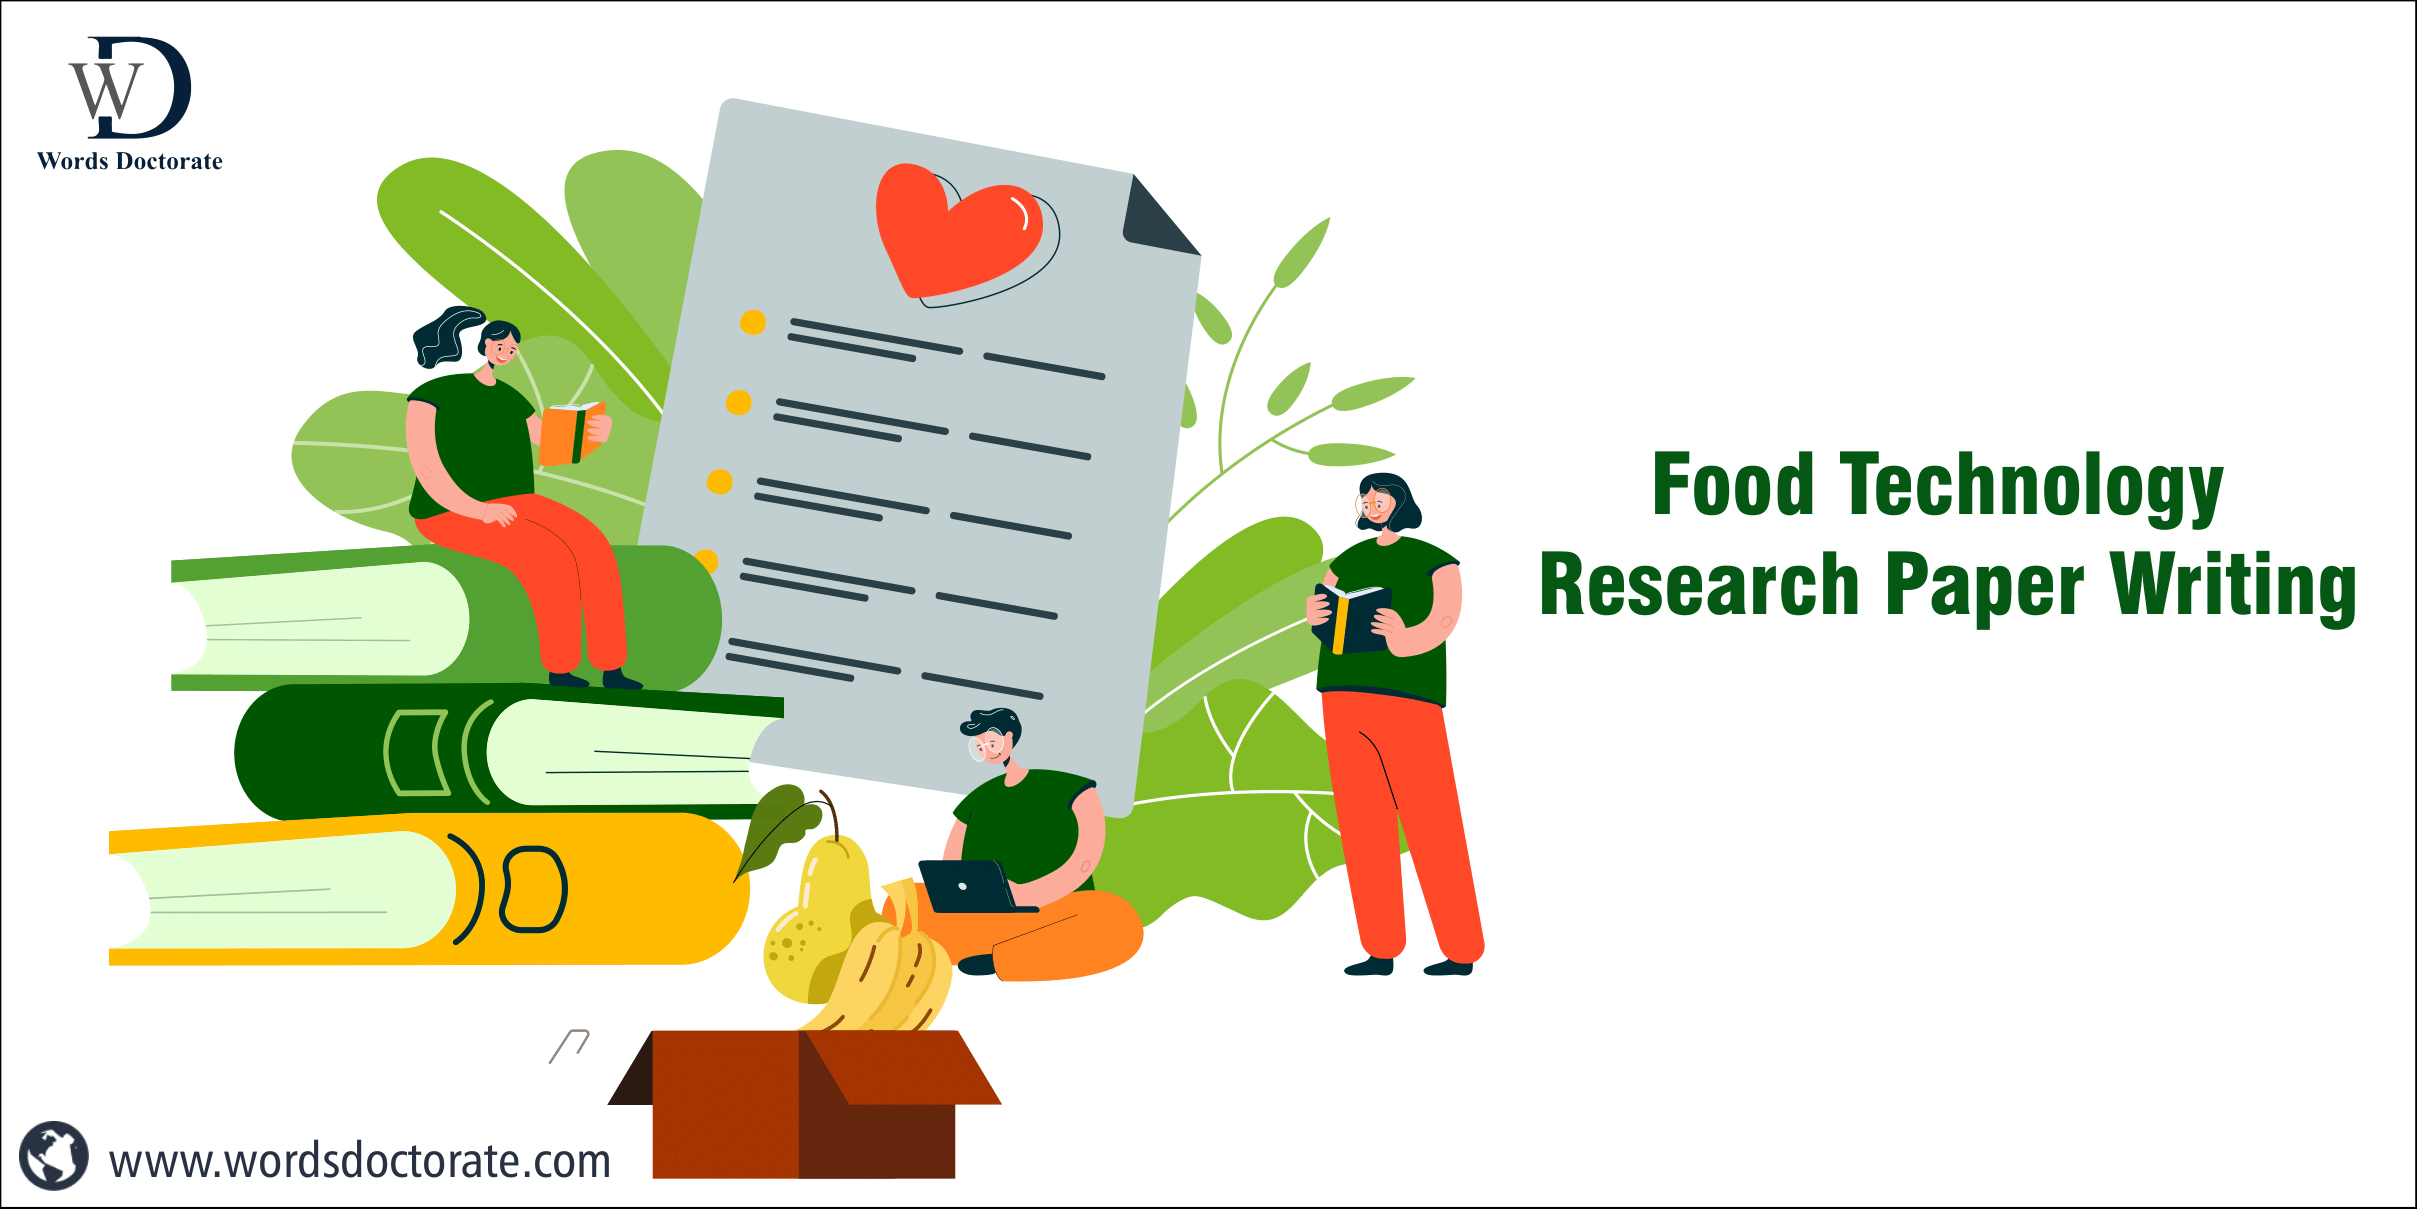 Food Technology Research Paper Writing